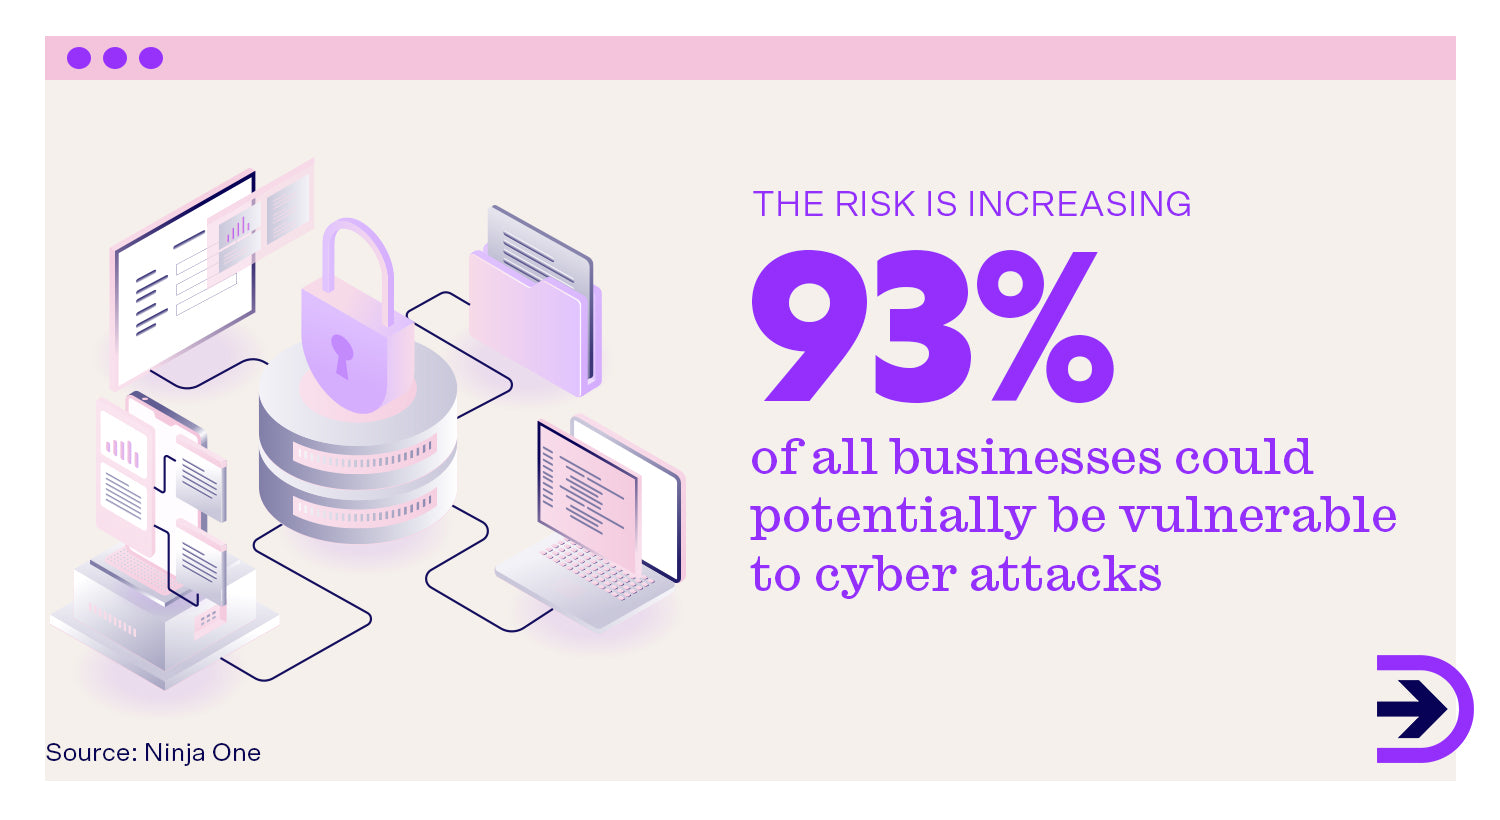  According to Ninja One, 93% of online businesses are vulnerable to cyber attacks.